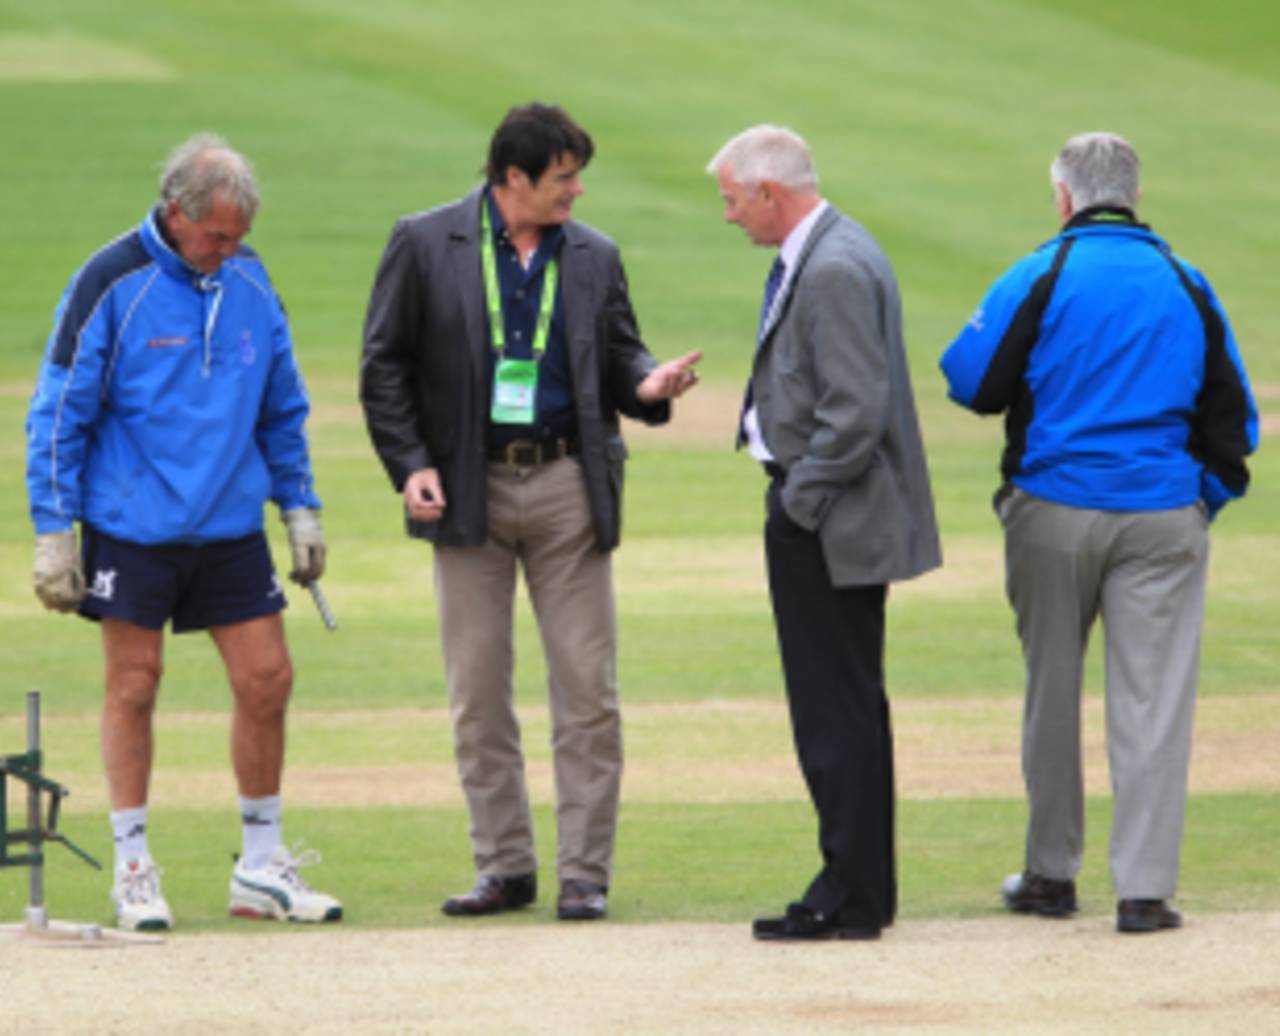 Warwickshire's Head Groundsman Steve Rouse and ECB officials check the wicket at Edgbaston, Warwickshire v Worcestershire, County Championship, Division One, Edgbaston, May 13, 2011